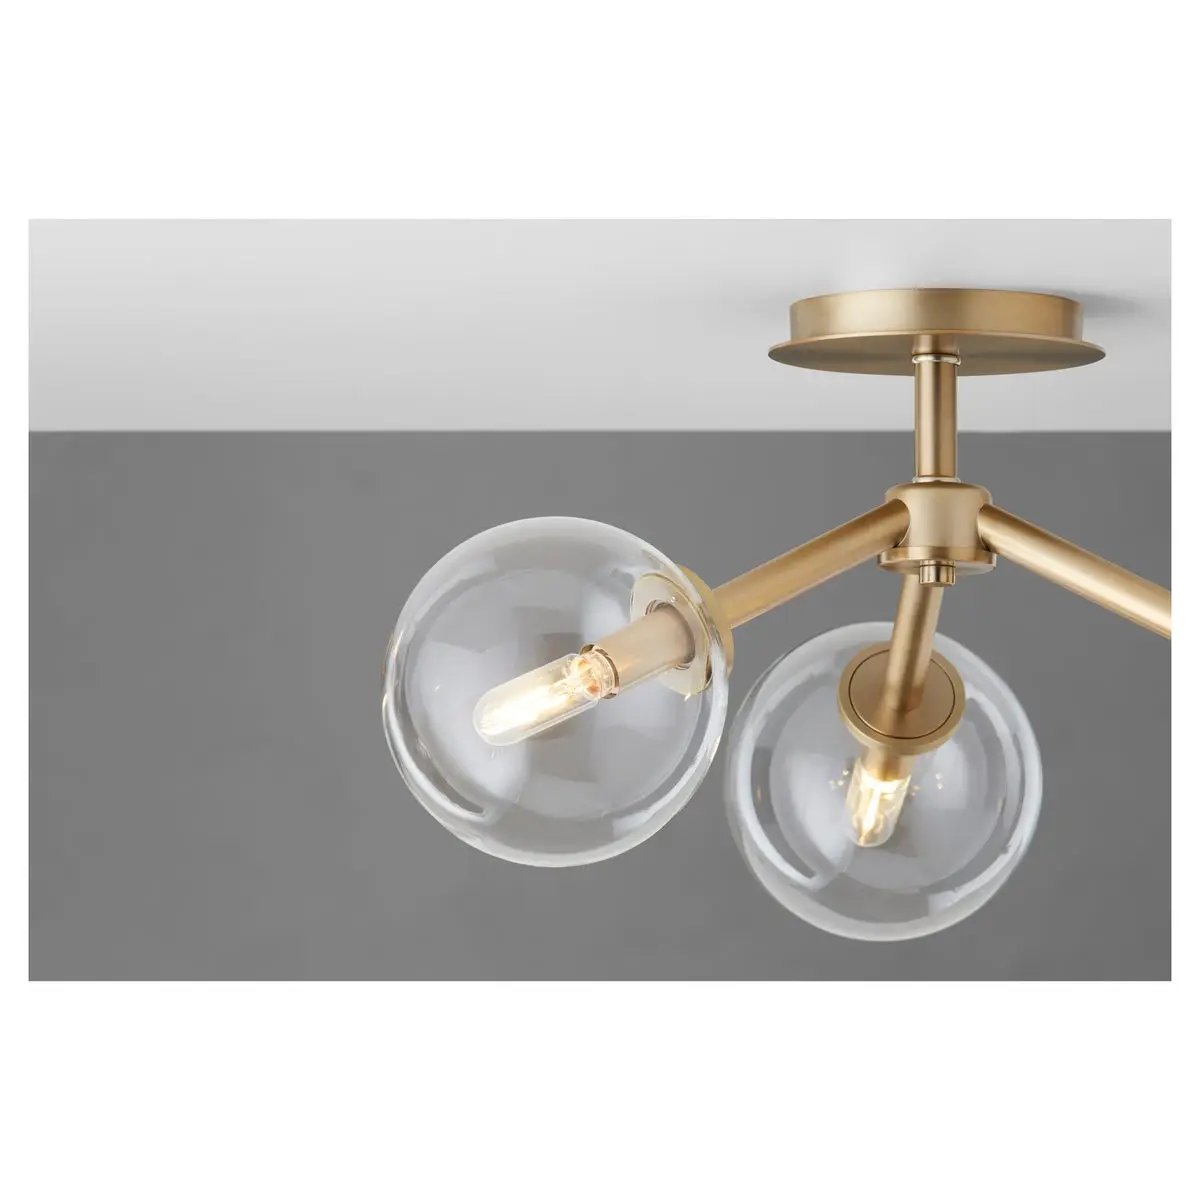 Sputnik flush mount ceiling light with two clear glass globes, aged brass frames. Mid-century modern appeal. 60W, 120V, 3 bulbs, dimmable. UL Listed. 21"W x 10.5"H. 2-year warranty.